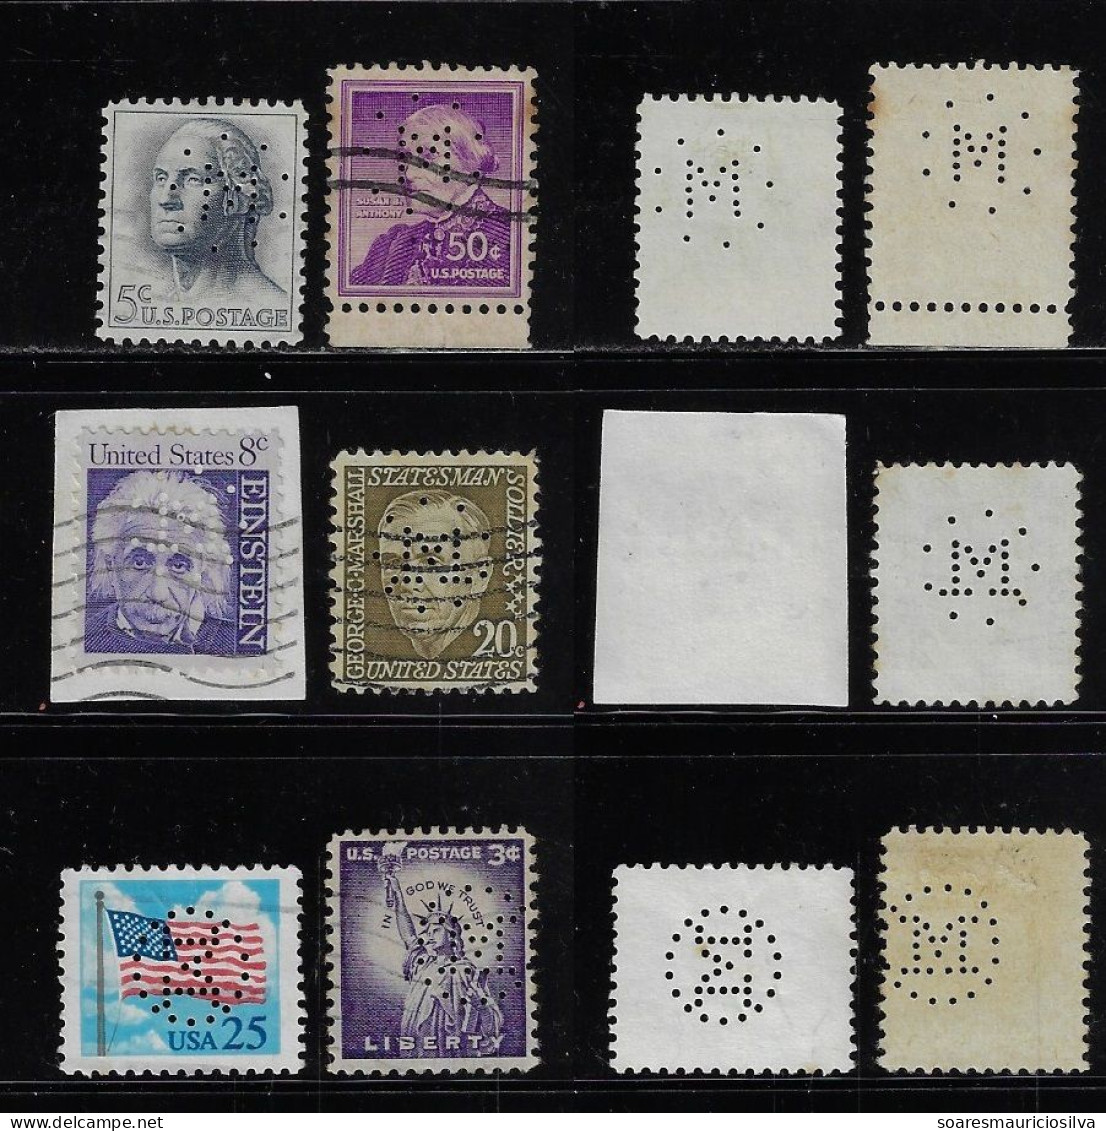 USA United States 6 Stamp With 3 Different Perfin M (circle) By State Of Michigan Lochung Perfore - Perforés